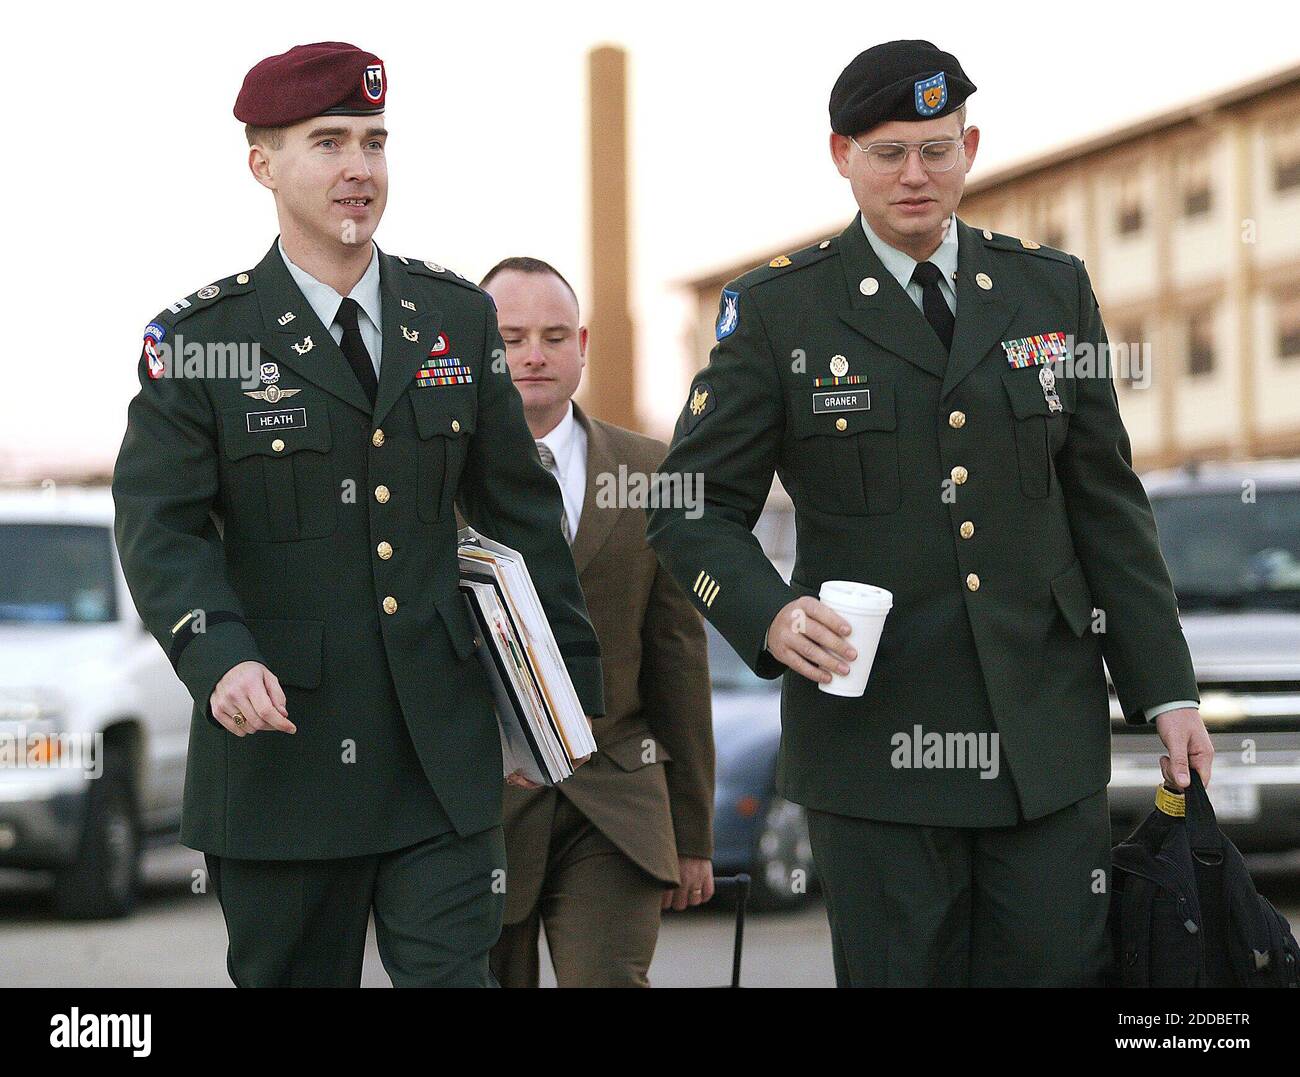 NO FILM, NO VIDEO, NO TV, NO DOCUMENTARY - Capt. Jay Heath (left) and Specialist Charles A. Graner (right) approach the court building for closing arguments in Graner's court martial on Friday morning, January 14, 2005. Army Specialist Charles A. Graner, Jr. faces a court martial in Ft. Hood, Texas, for his involvement in the Abu-Ghraib prisoner abuse scandal in Iraq. Photo by Ralph Lauer/Fort Worth Star Telegramme/KRT/ABACA. Stock Photo